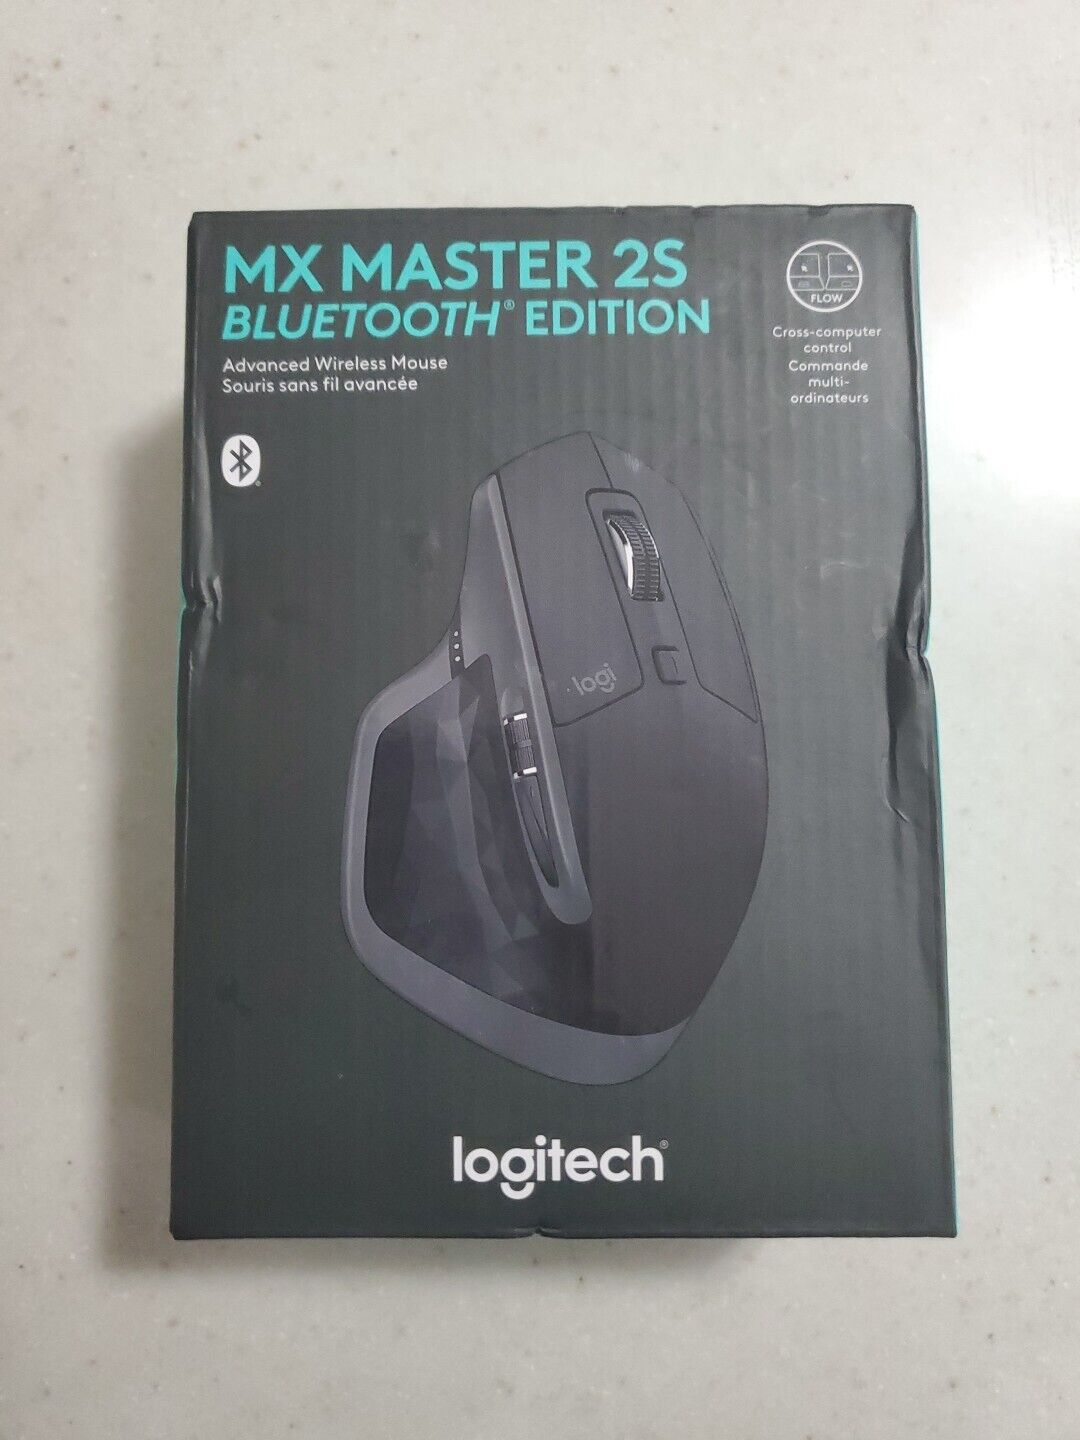 BRAND NEW Logitech MX Master 2S Wireless Mobile Mouse - 